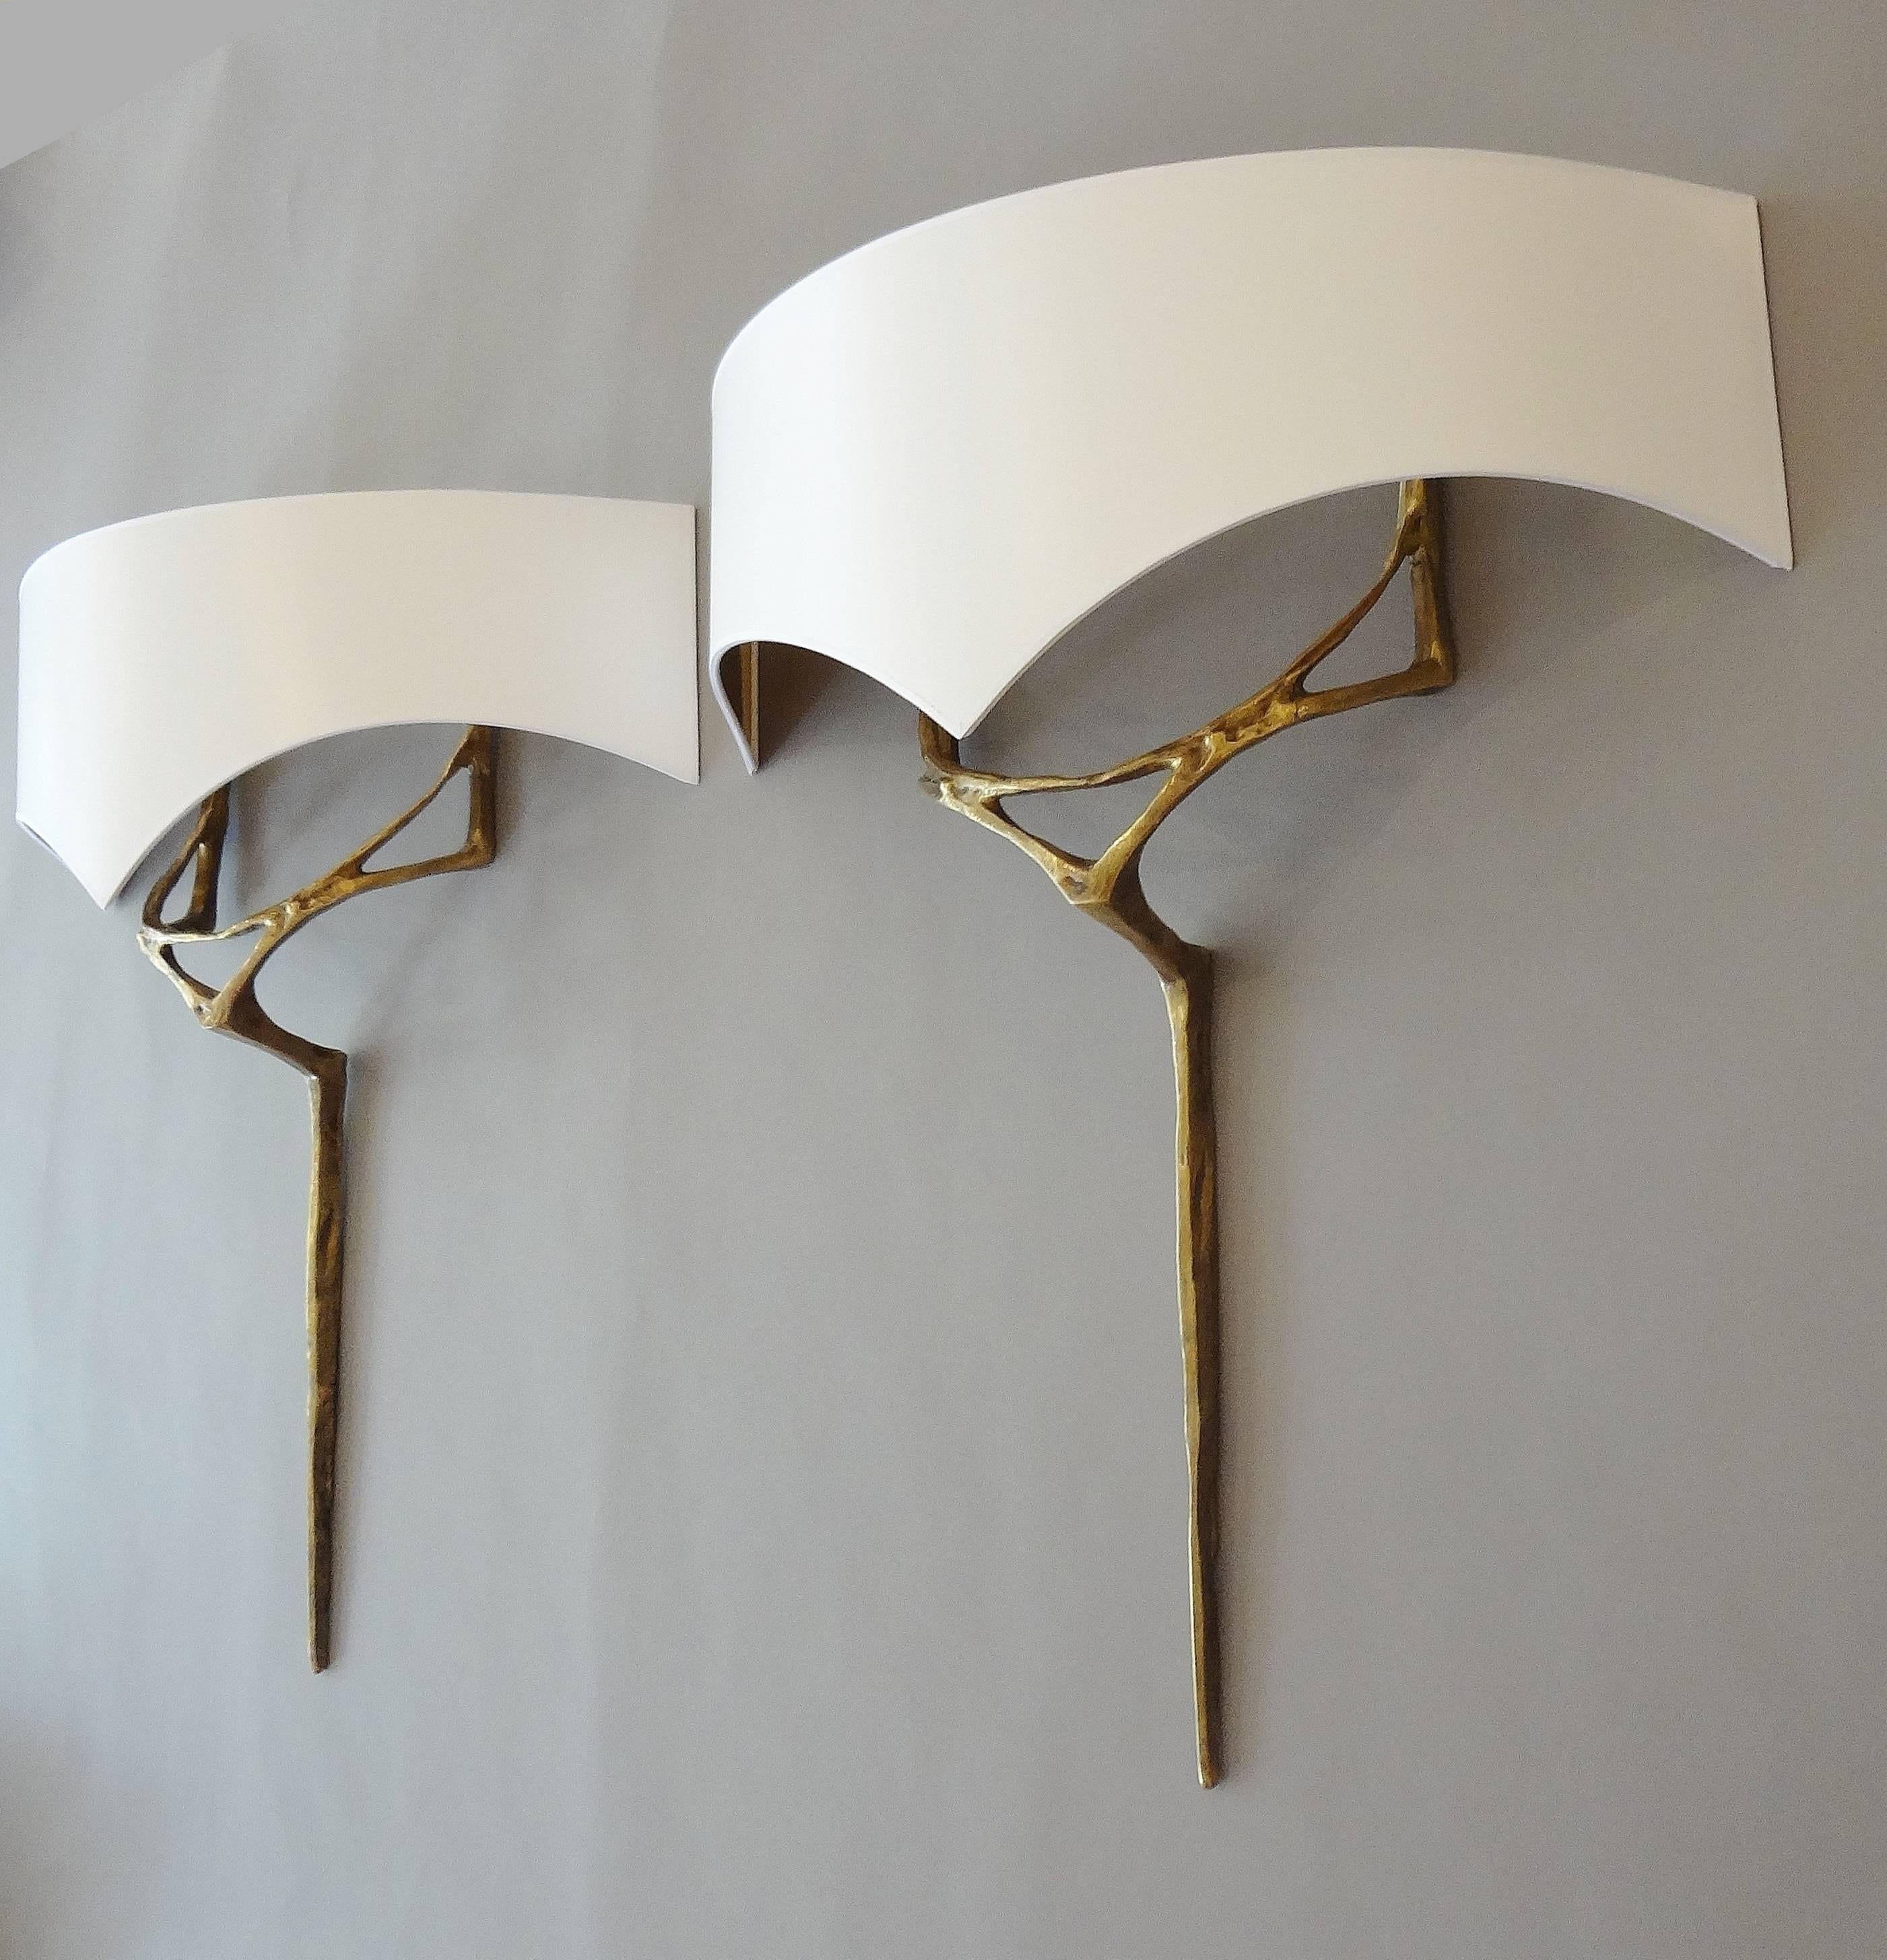 Félix Agostini (1910-1980)
Pair of gilt bronze sculpted wall-sconces called Erato,
with a white card shade, gilt inside.
Measures: bronze height 58 x width 5 x depth 10 cm.
Shade height 20 x length 52 x depth 19 cm.3.

